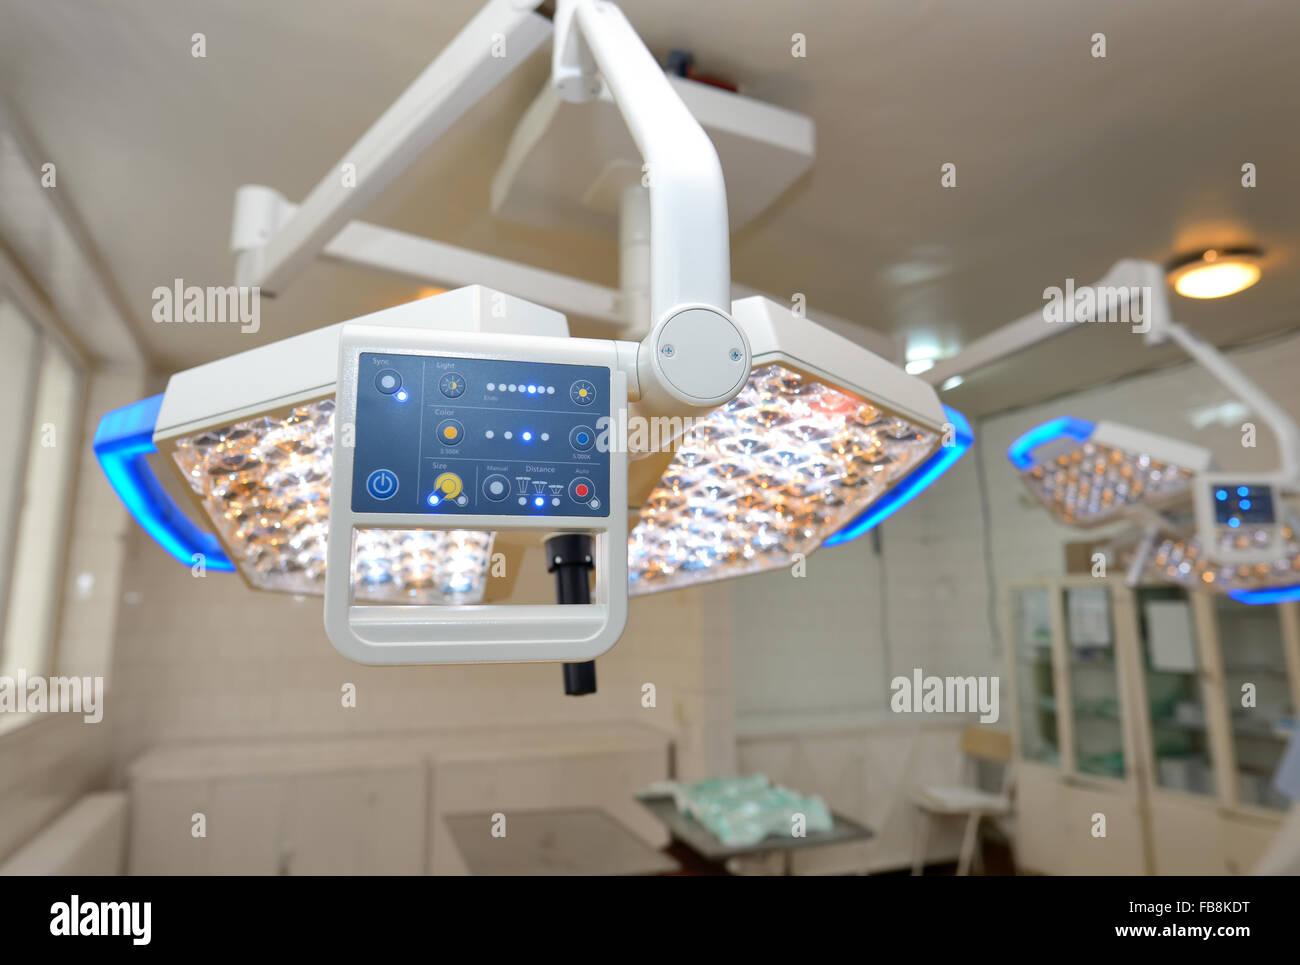 Display of surgical lamps in operation room Stock Photo